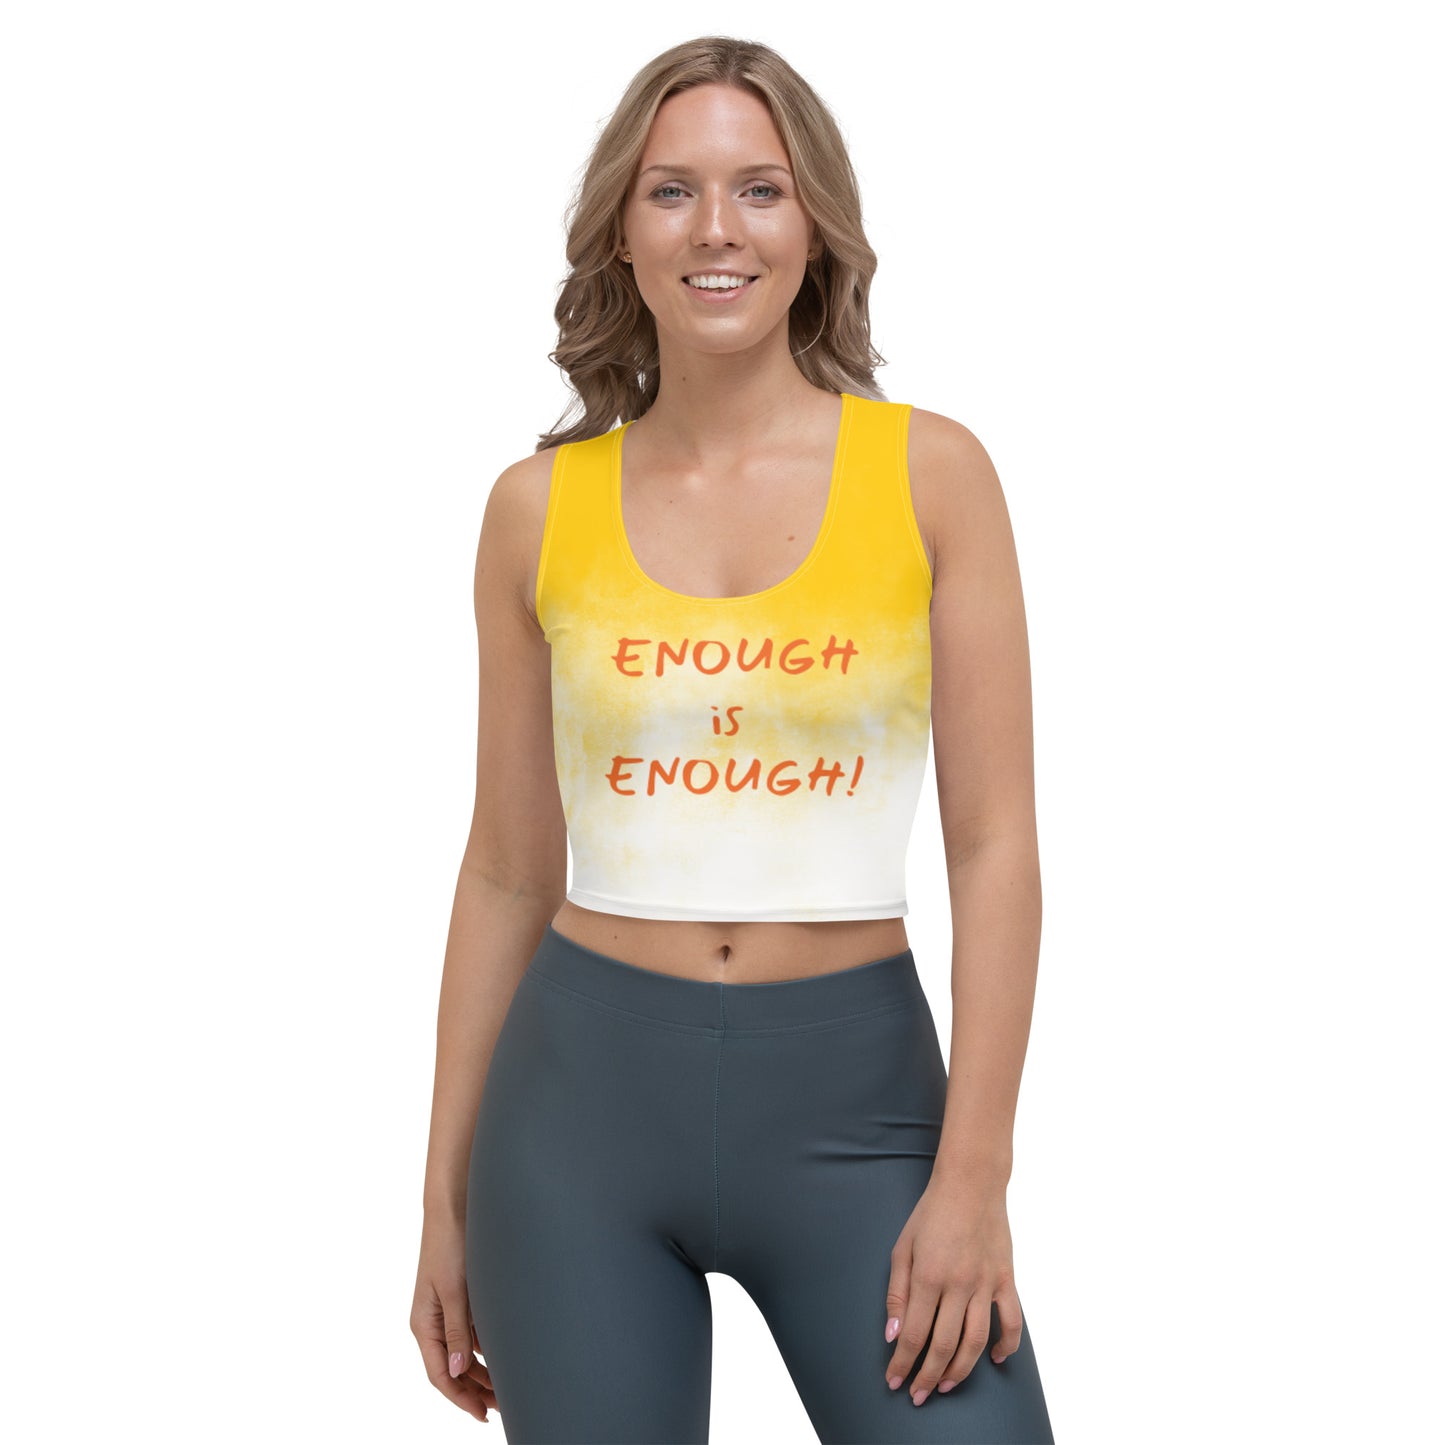 Sunny Day Crop Top - ENOUGH IS ENOUGH!